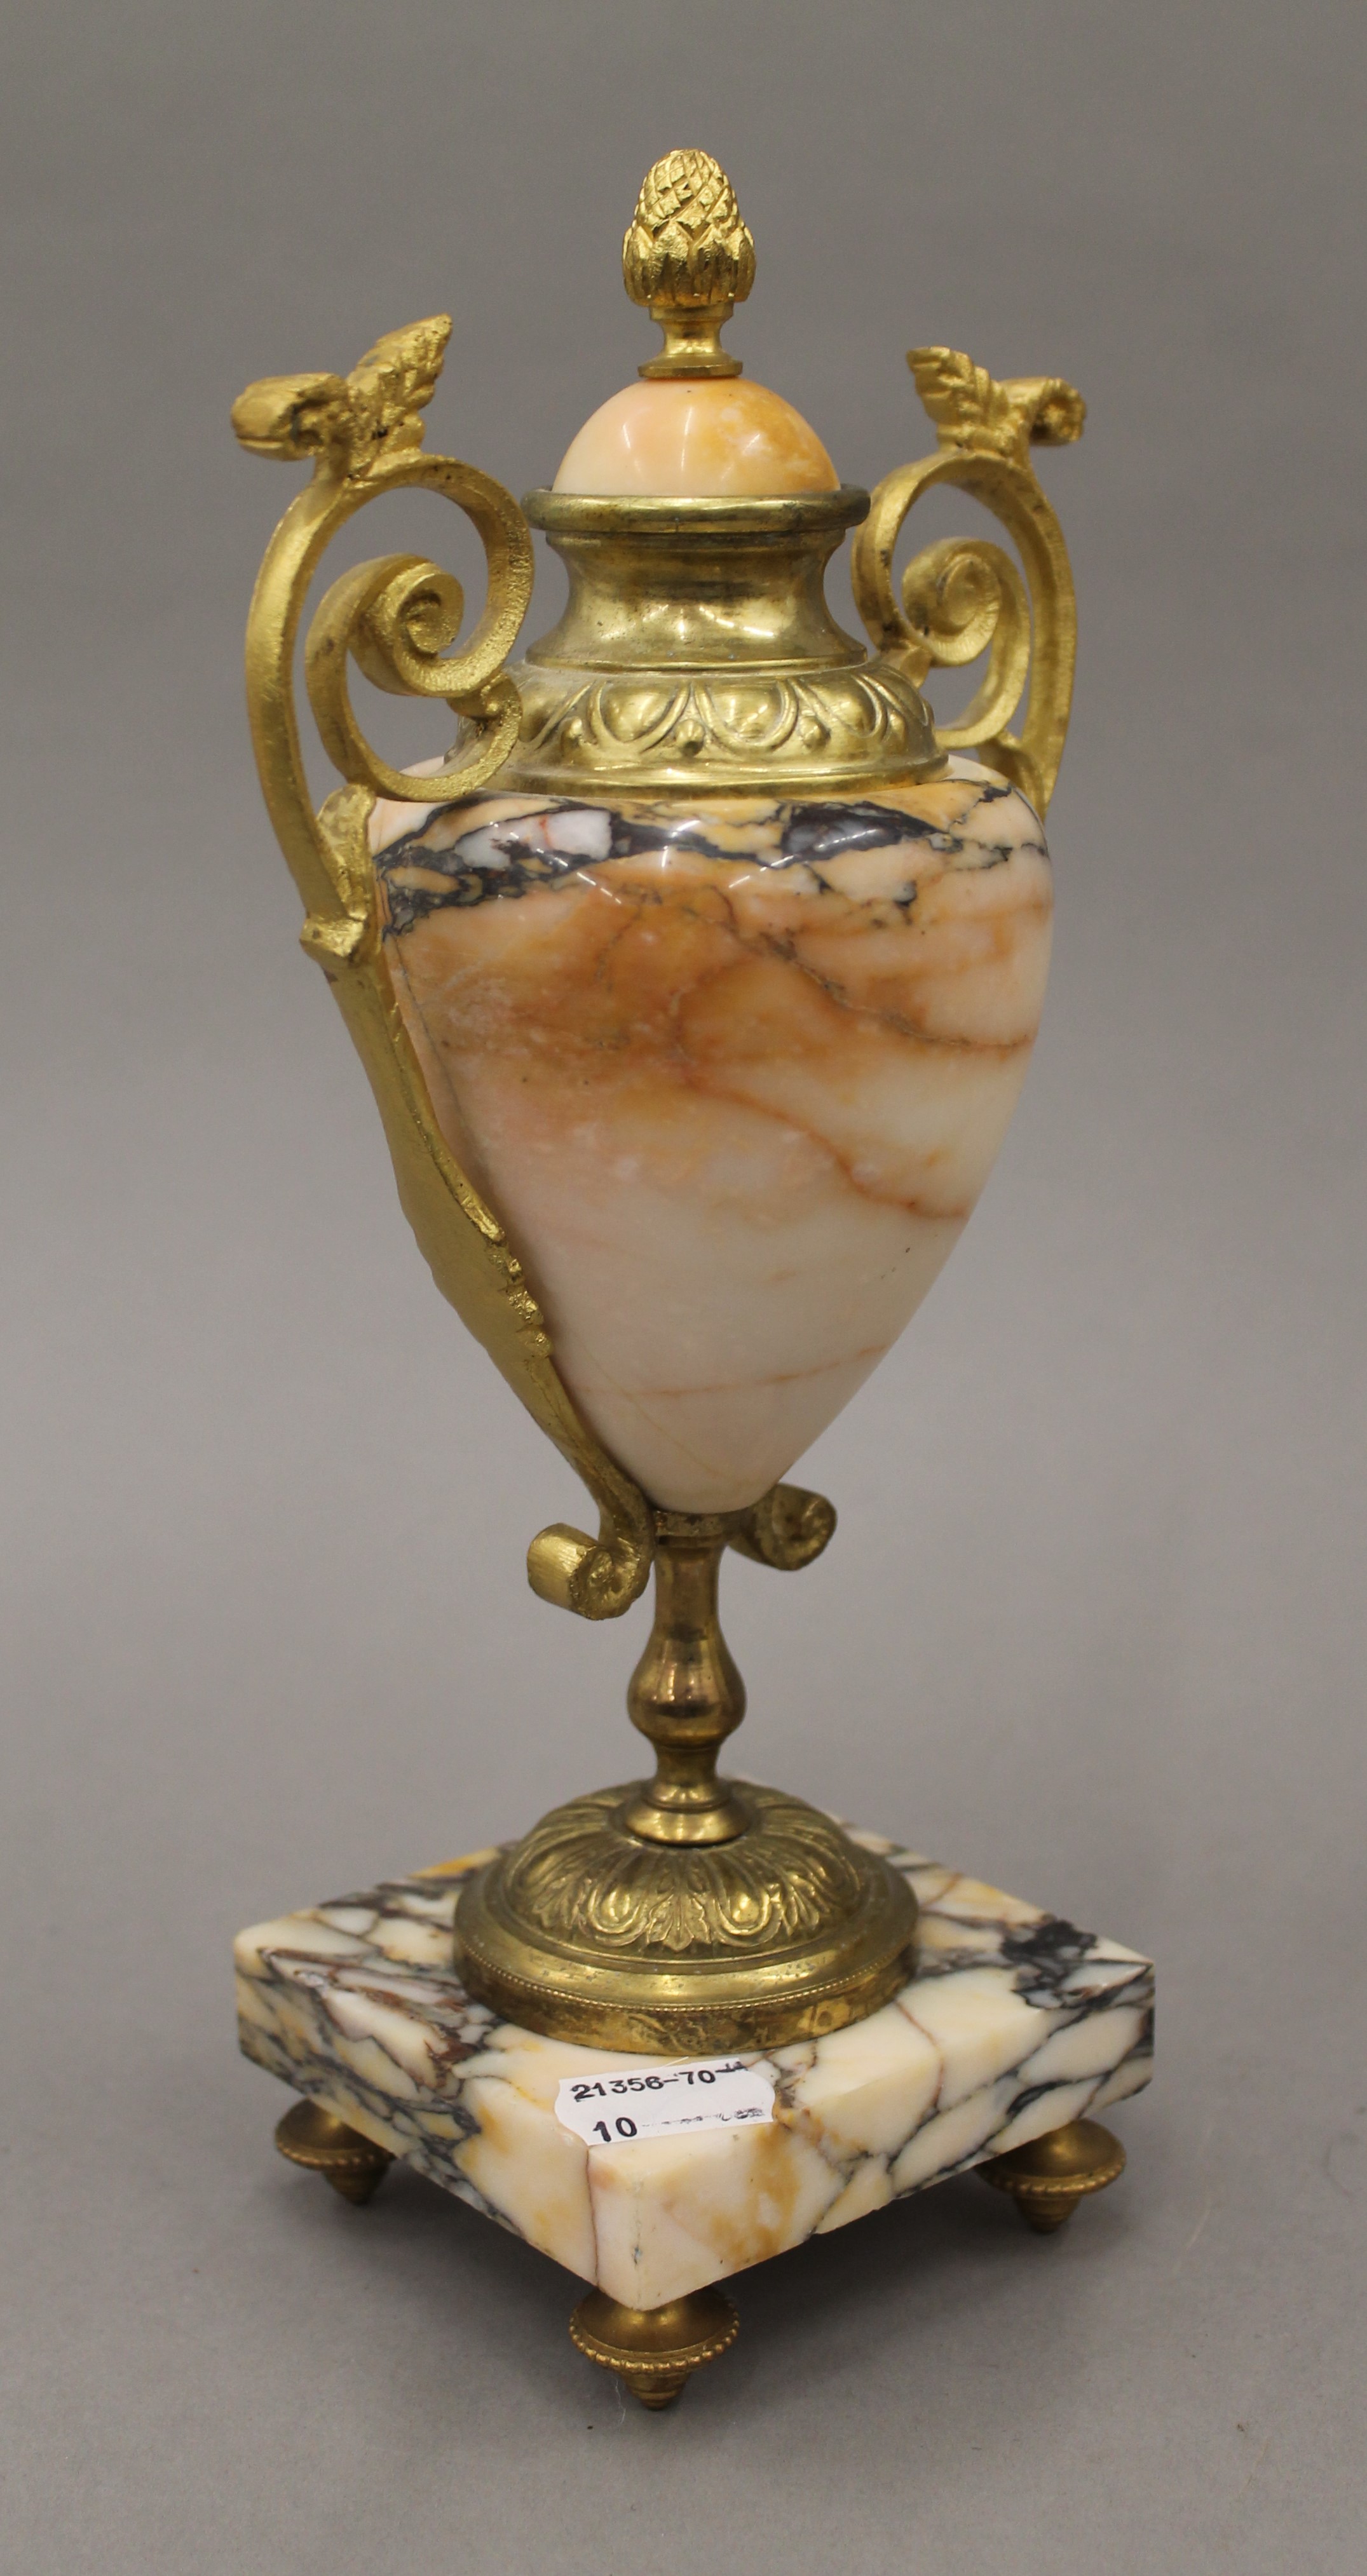 A marble and ormolu clock garniture with pendulum and key, with enamel dial and striking movement. - Image 11 of 14